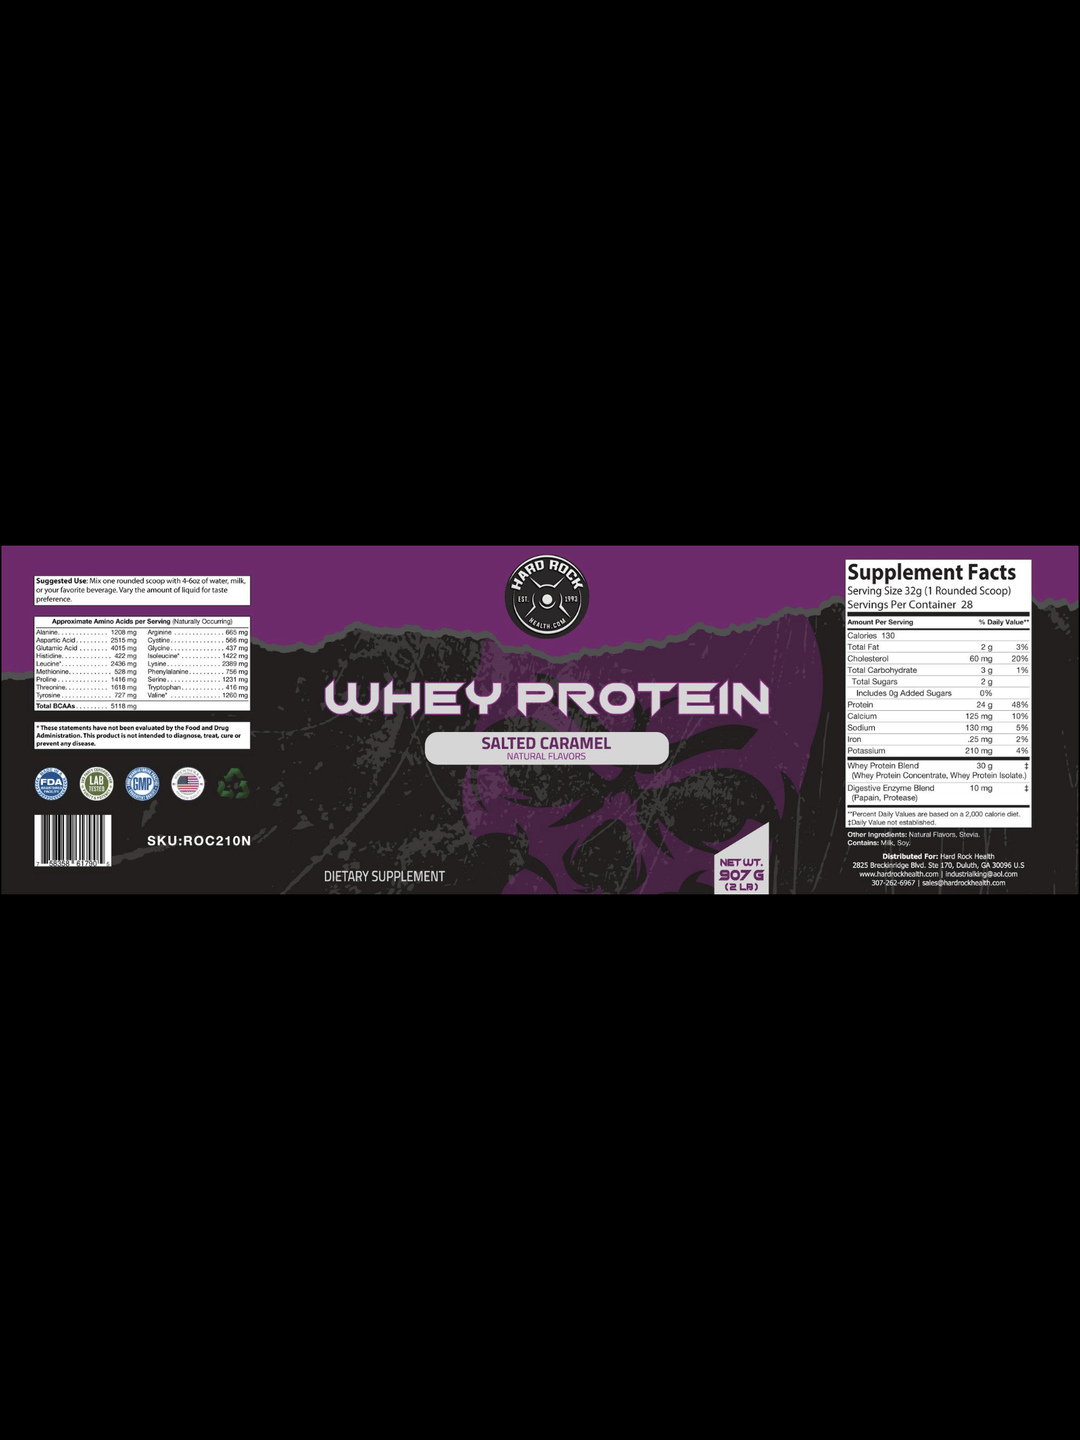 Salted Caramel Whey Protein